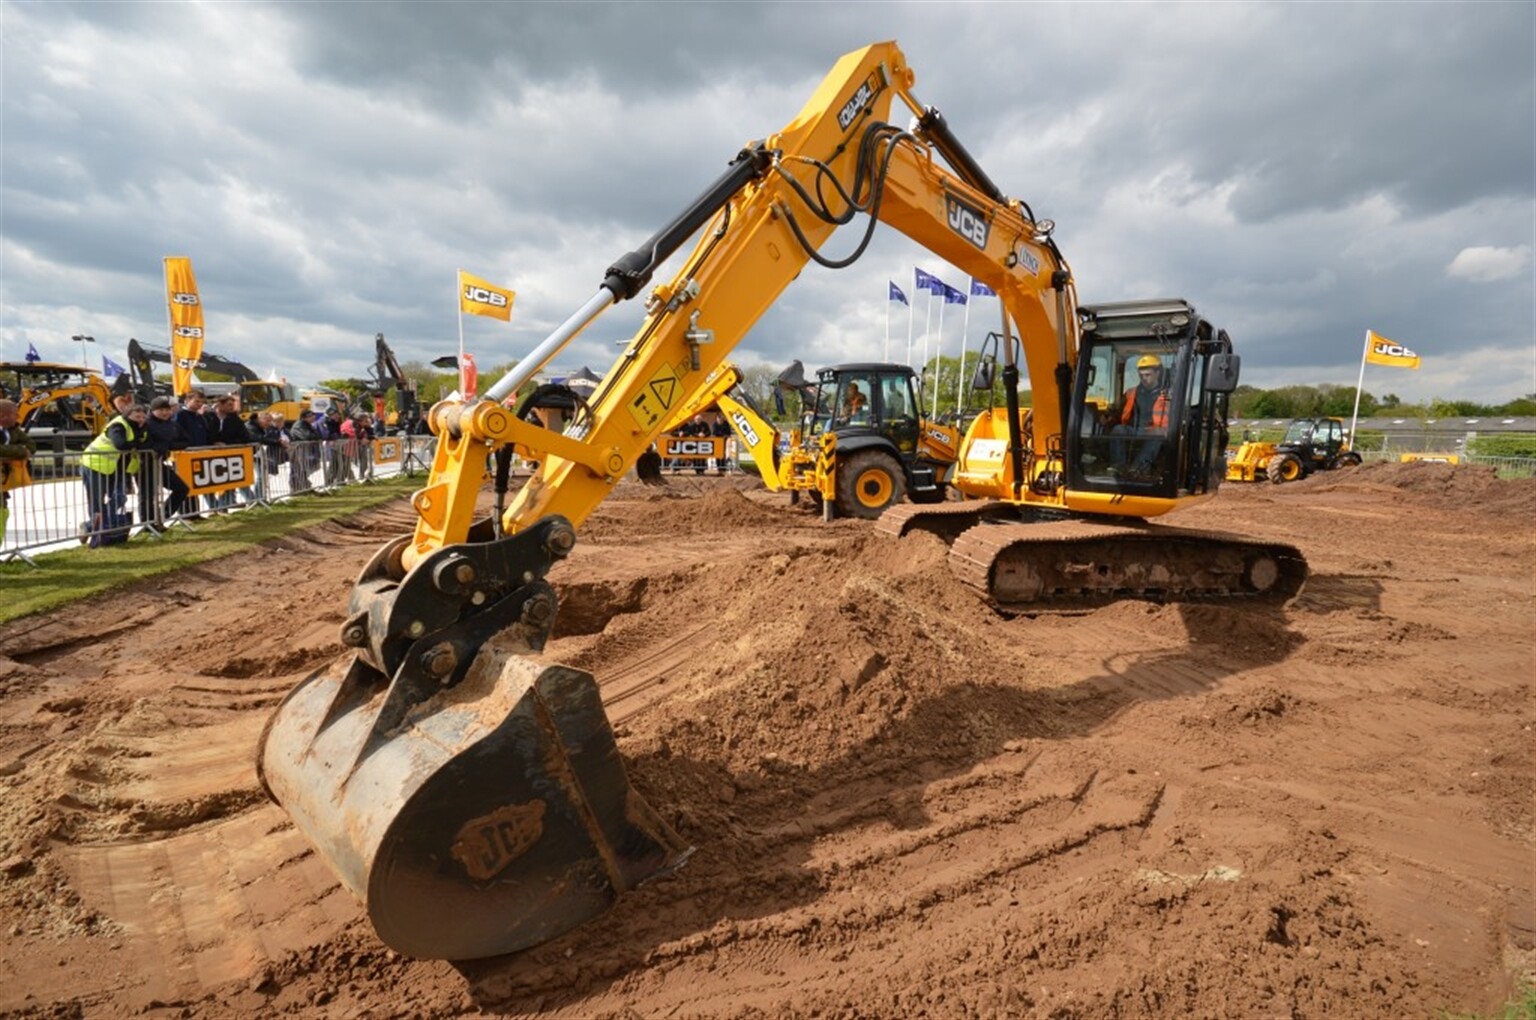 Digger action at operator open day & family plant show